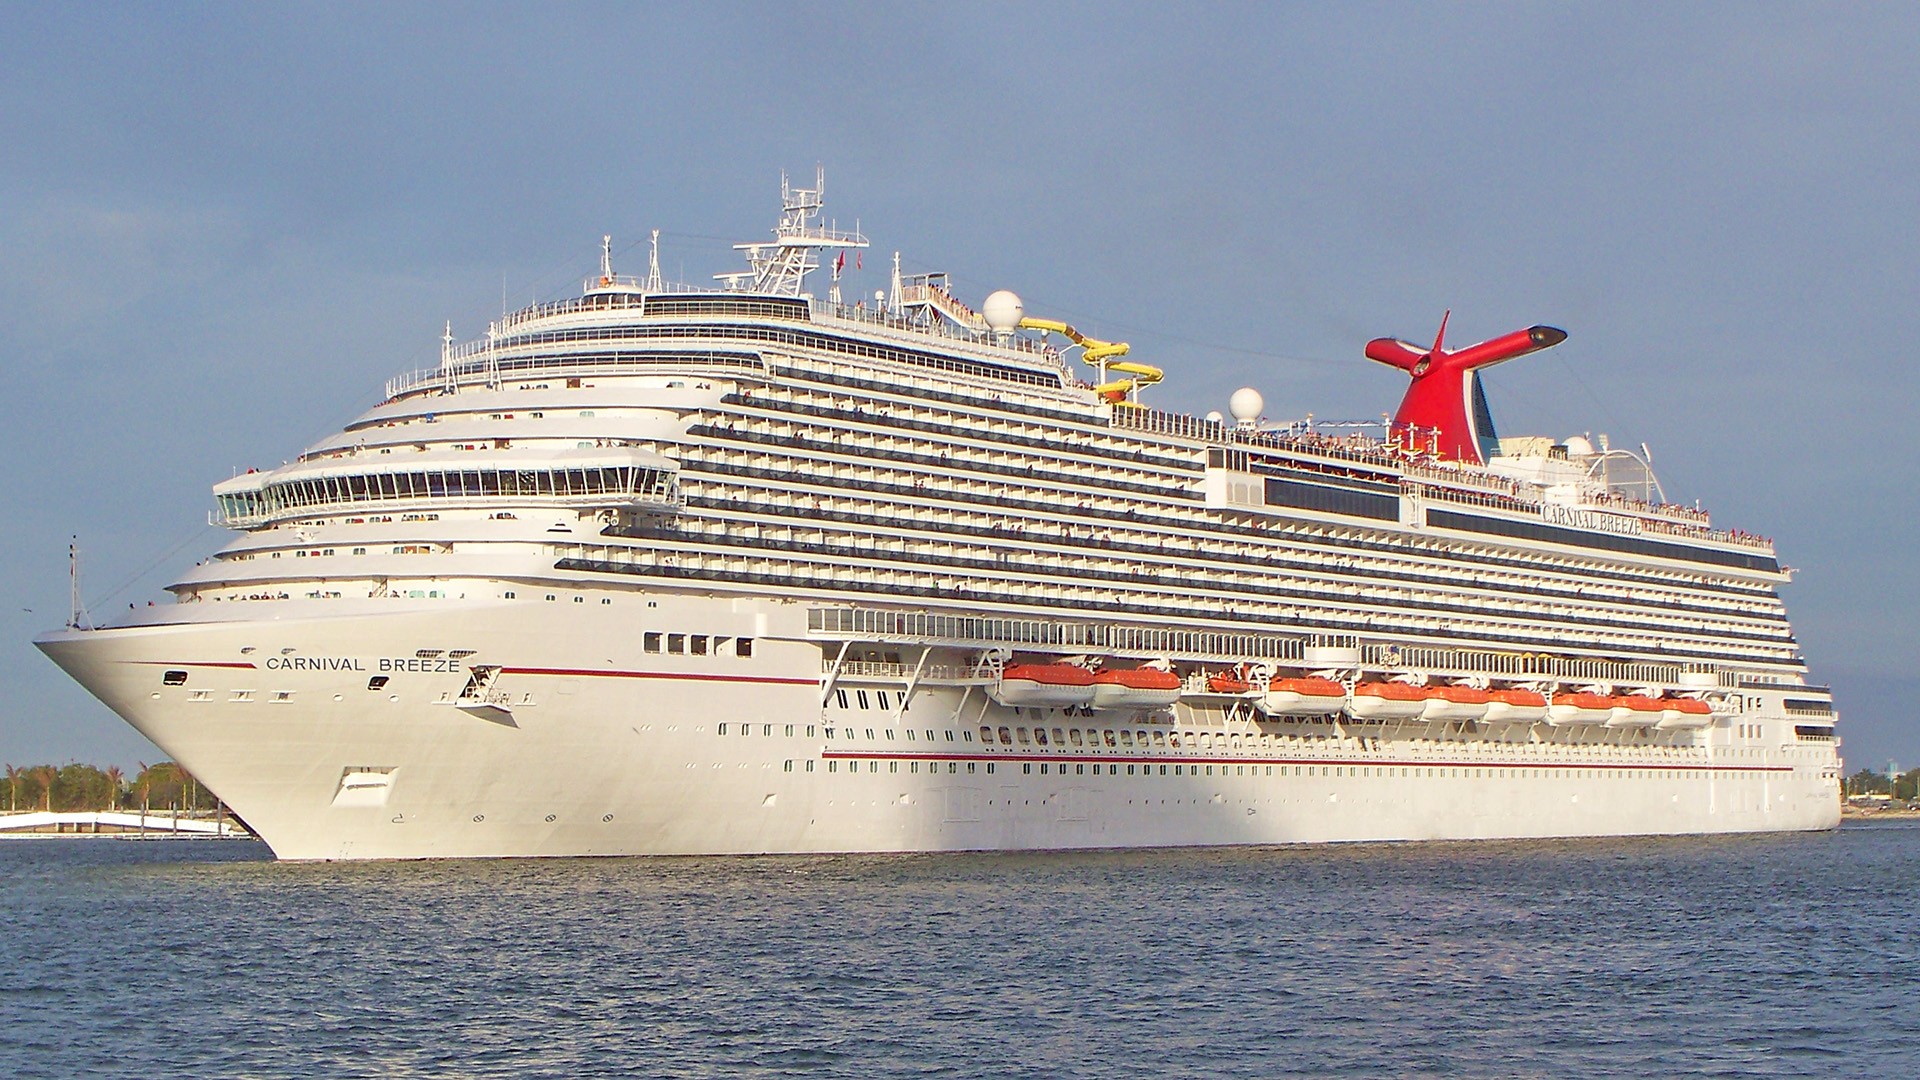 Photo Tour of Carnival Vista, Carnival Cruise Line's Newest Cruise